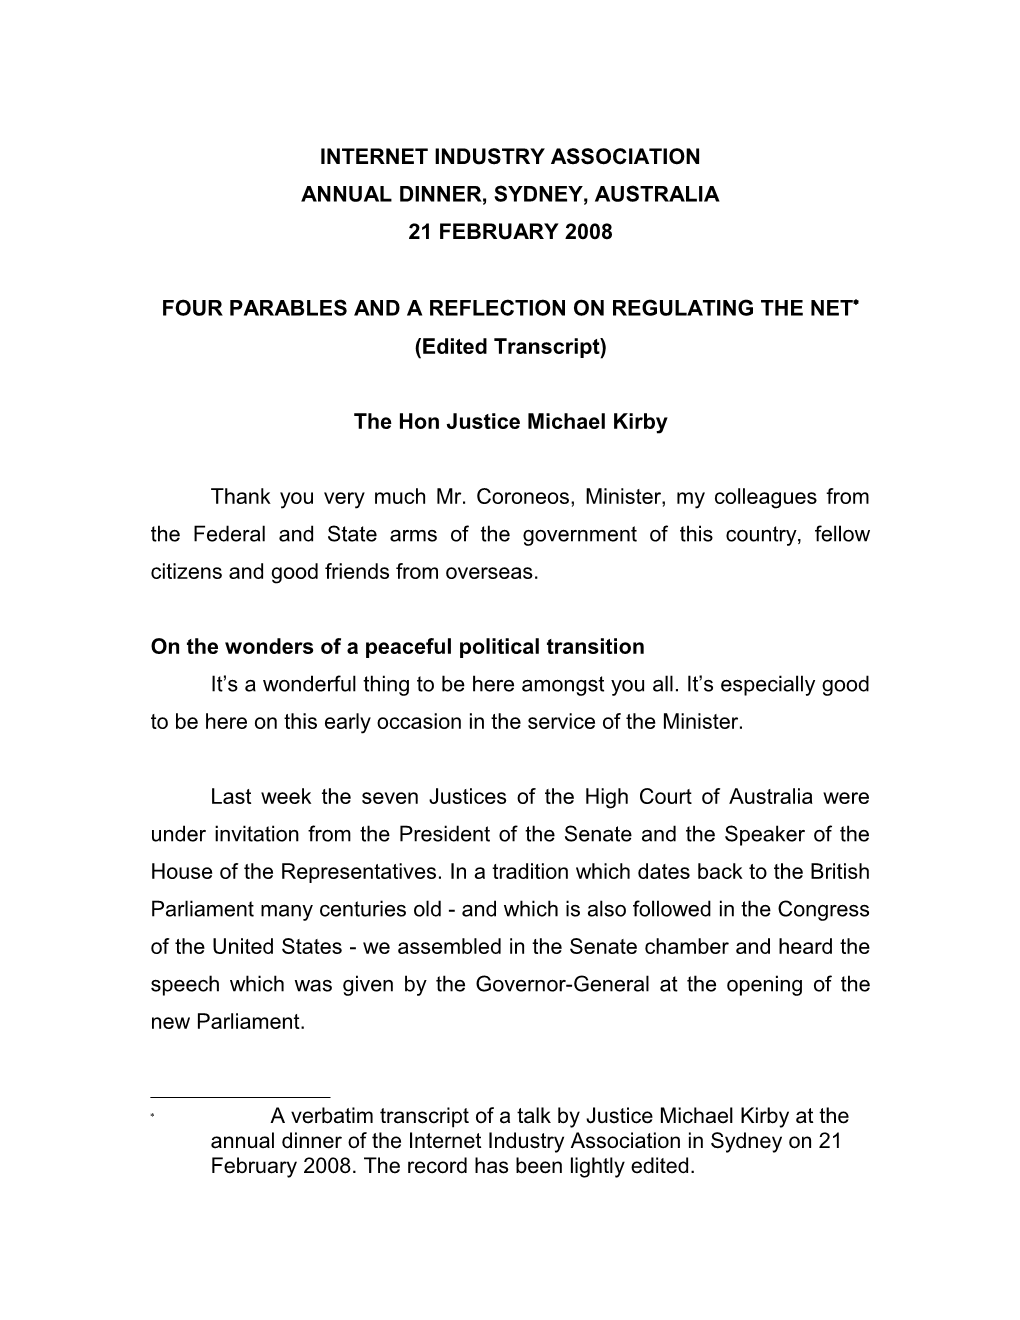 Judge Michael Kirby's Preamble on Regulating the Net